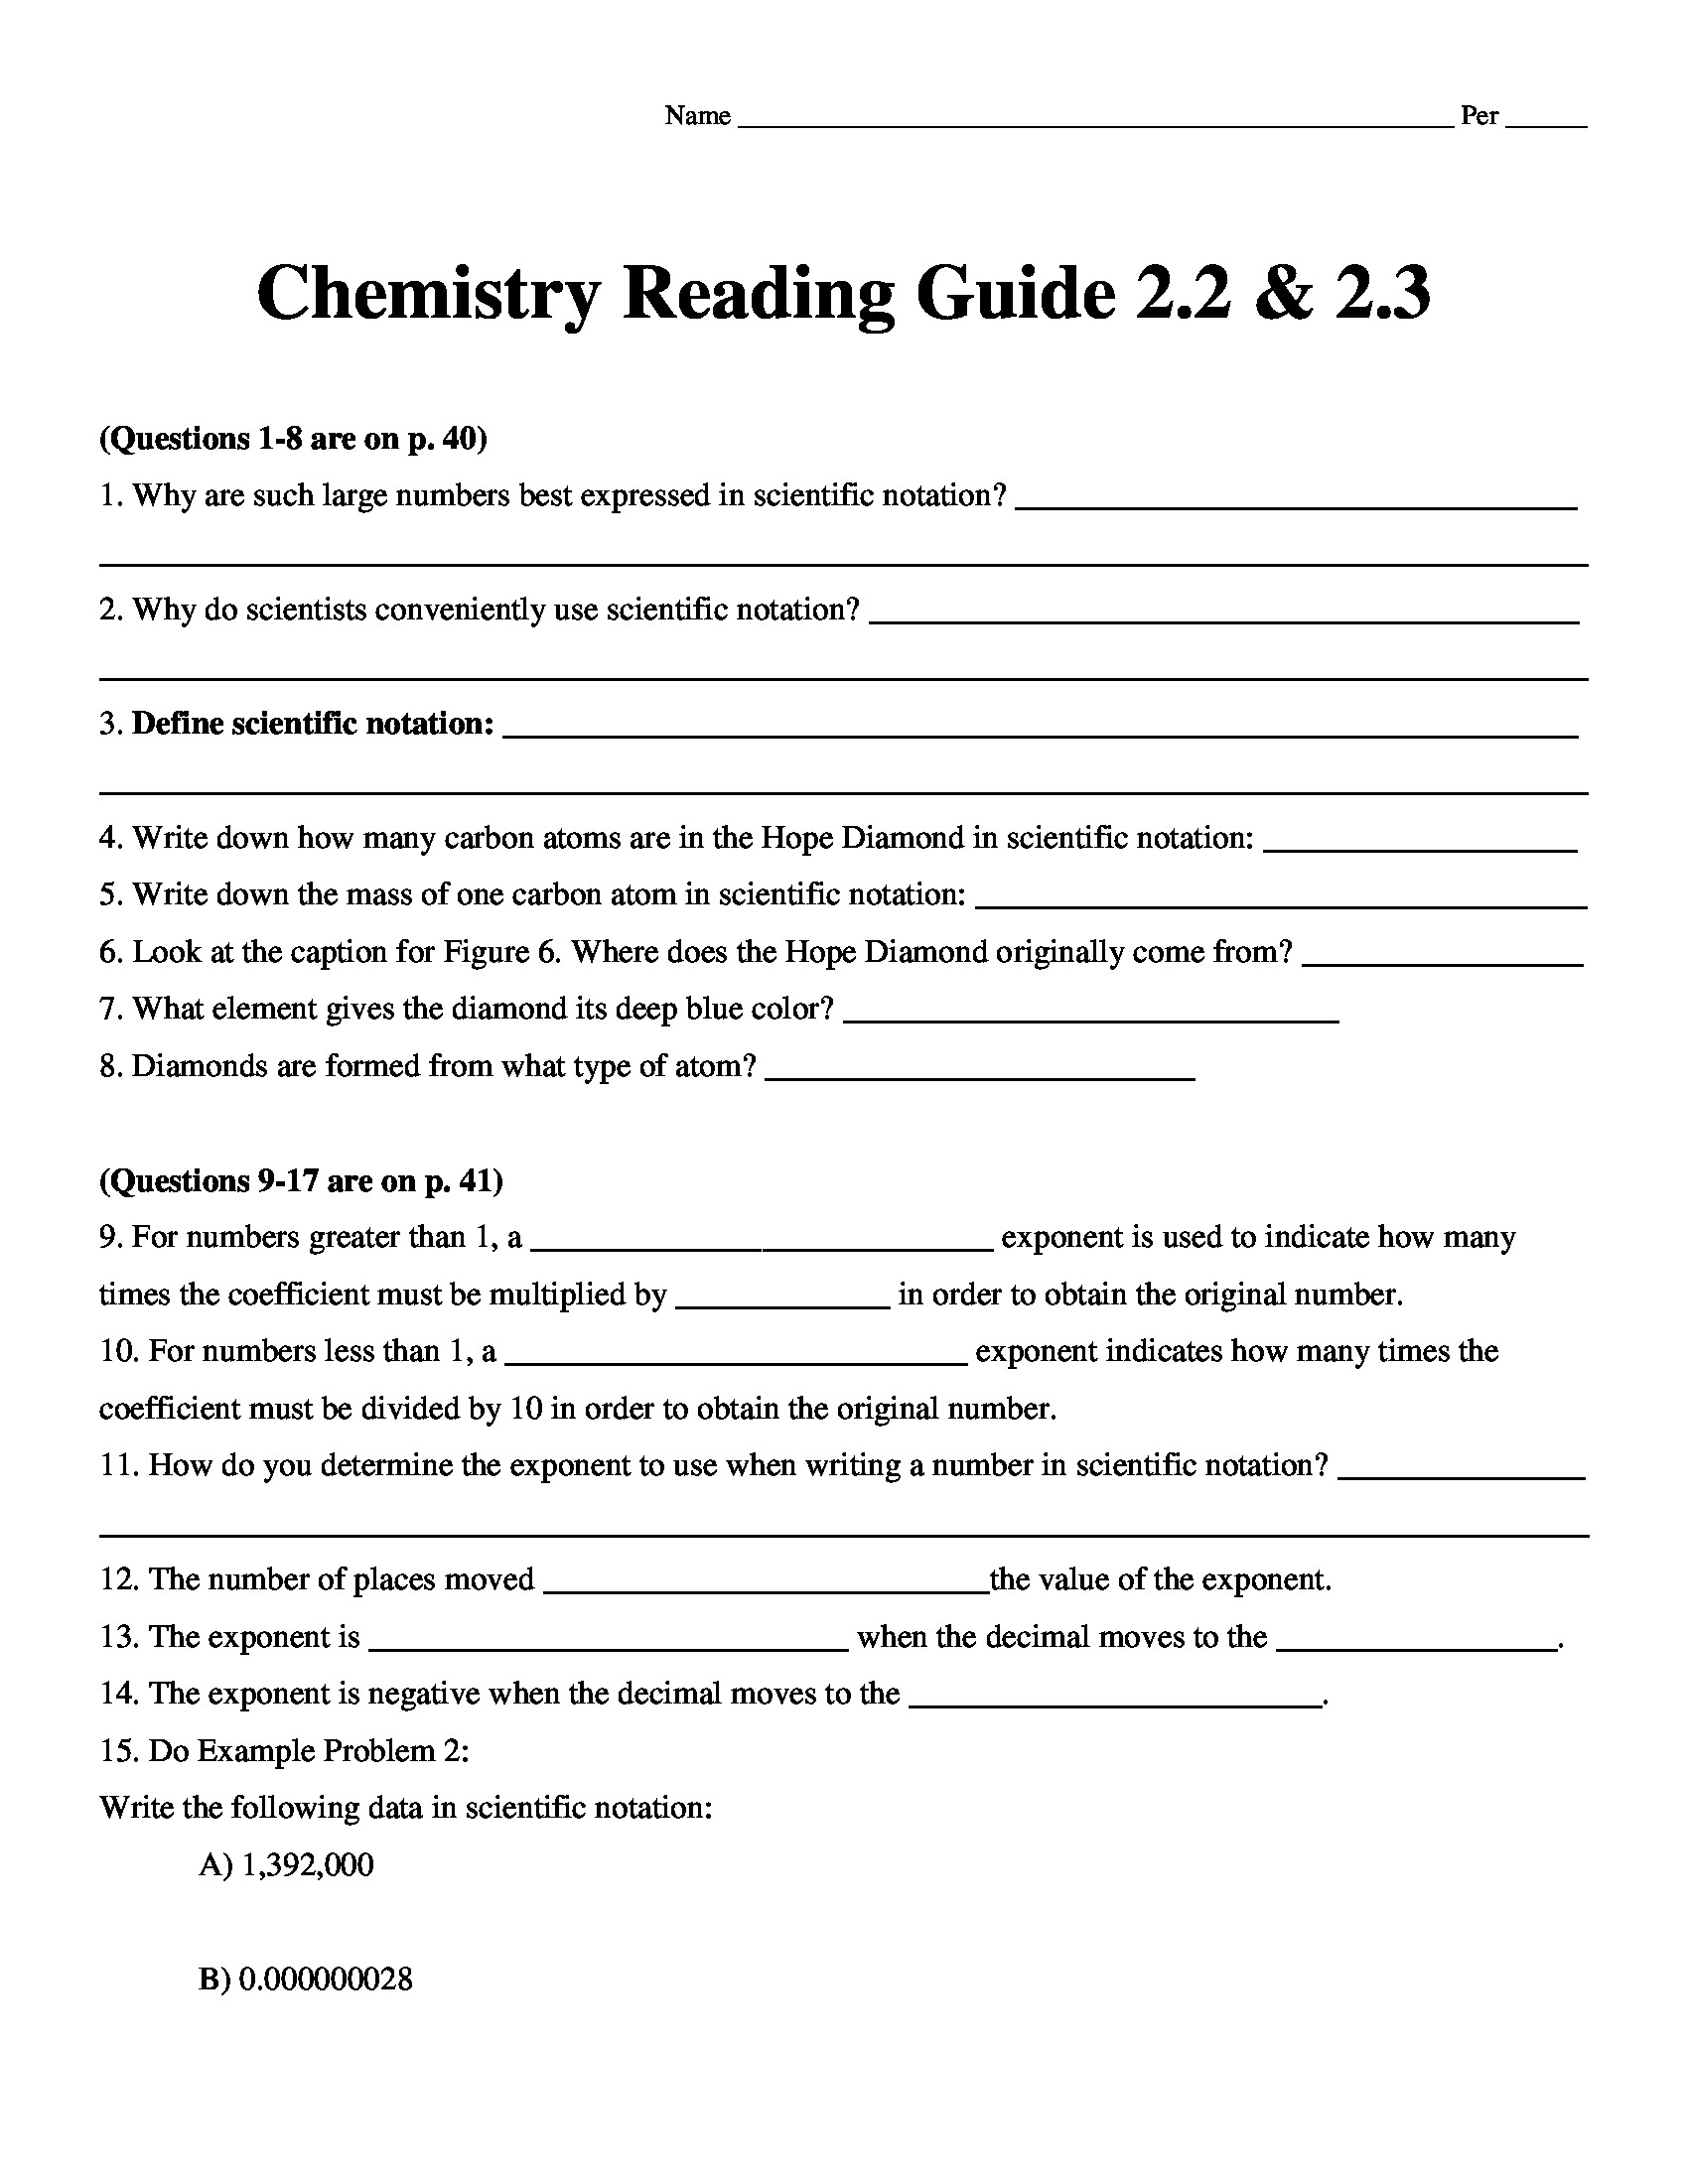 Scientific Notation Worksheet Chemistry Chemistry Matter and Change 2013 Reading Guide Worksheet Chapter 2 2 2 3 Analyzing Data